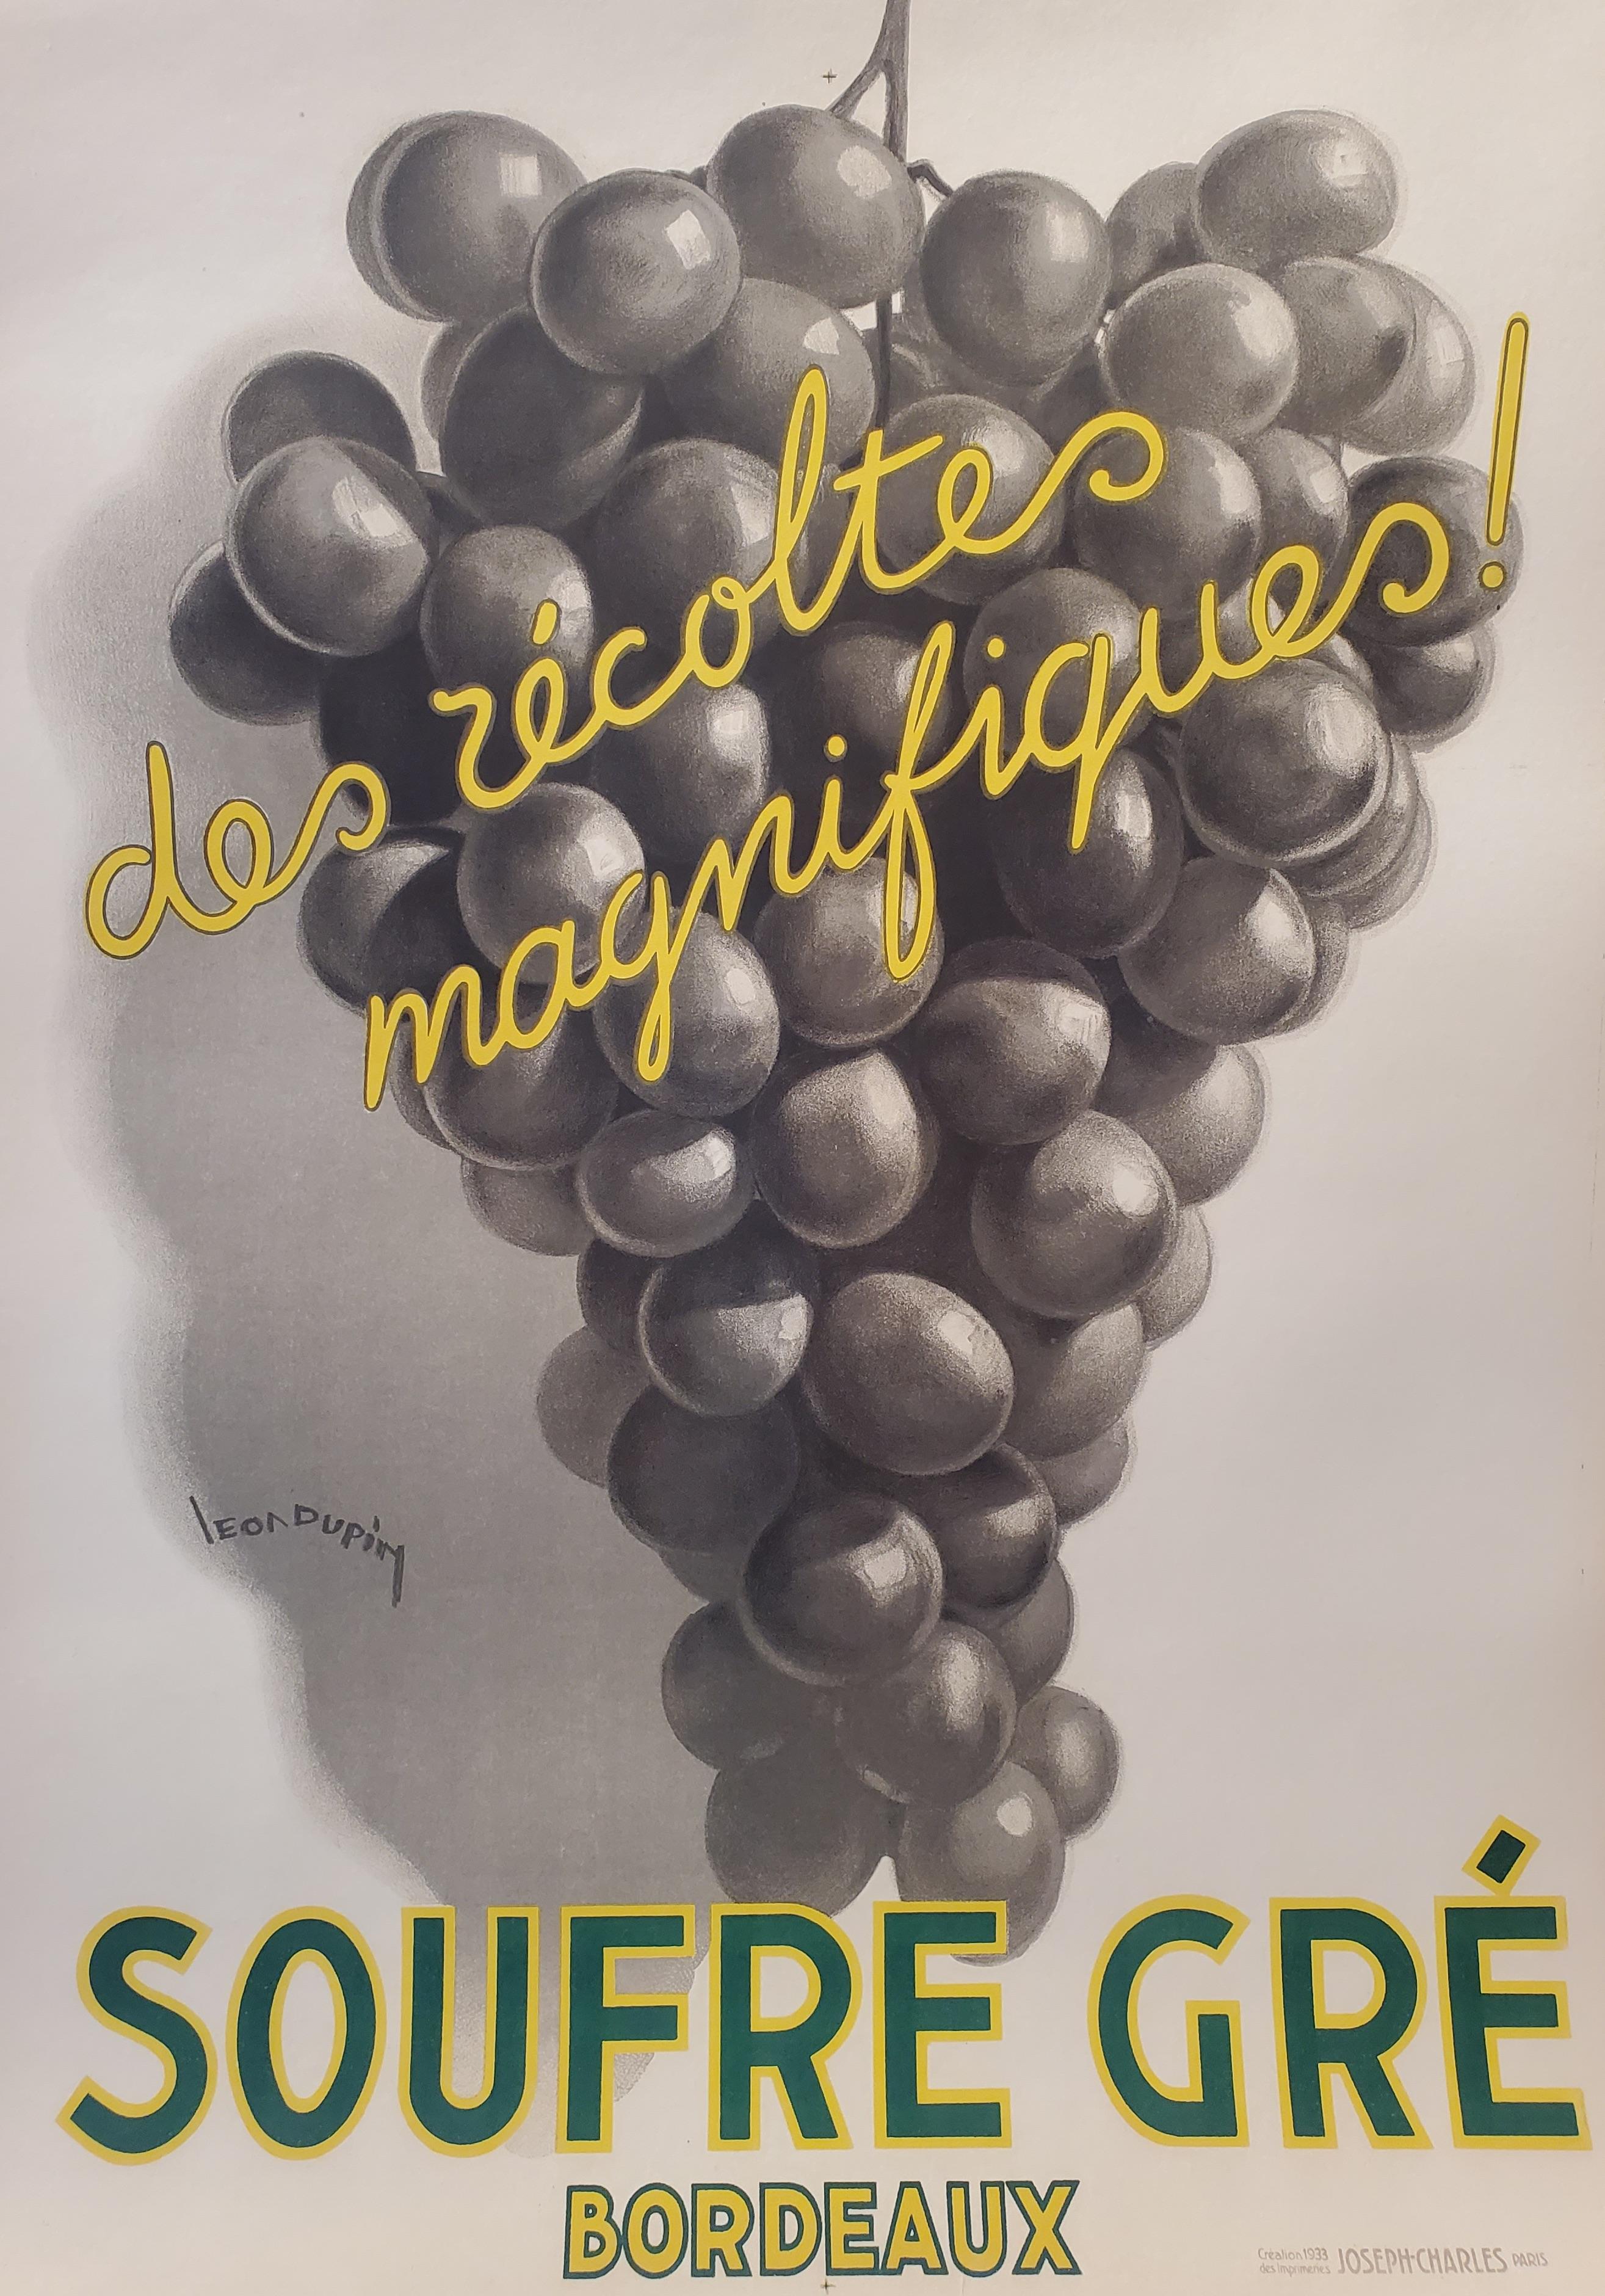 Mid-20th Century Original Vintage French Art Deco Wine Poster, 'Soufre Gre', 1933 by Leon Dupin